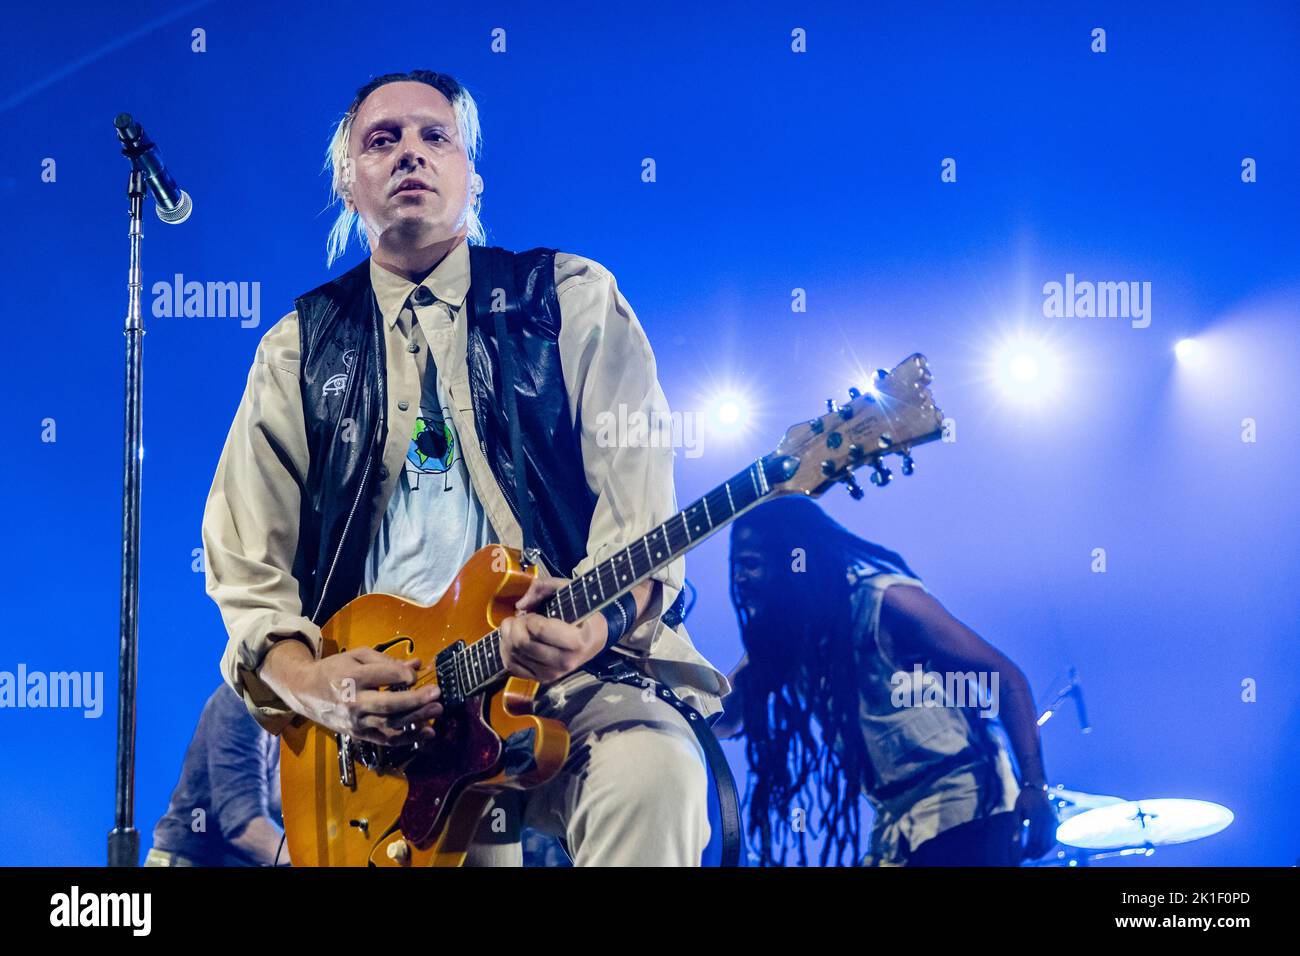 Milan Italy. 17 September 2022. The Canadian rock band ARCADE FIRE performs live on stage at Mediolanum Forum during 'The WE Tour 2022'. Stock Photo